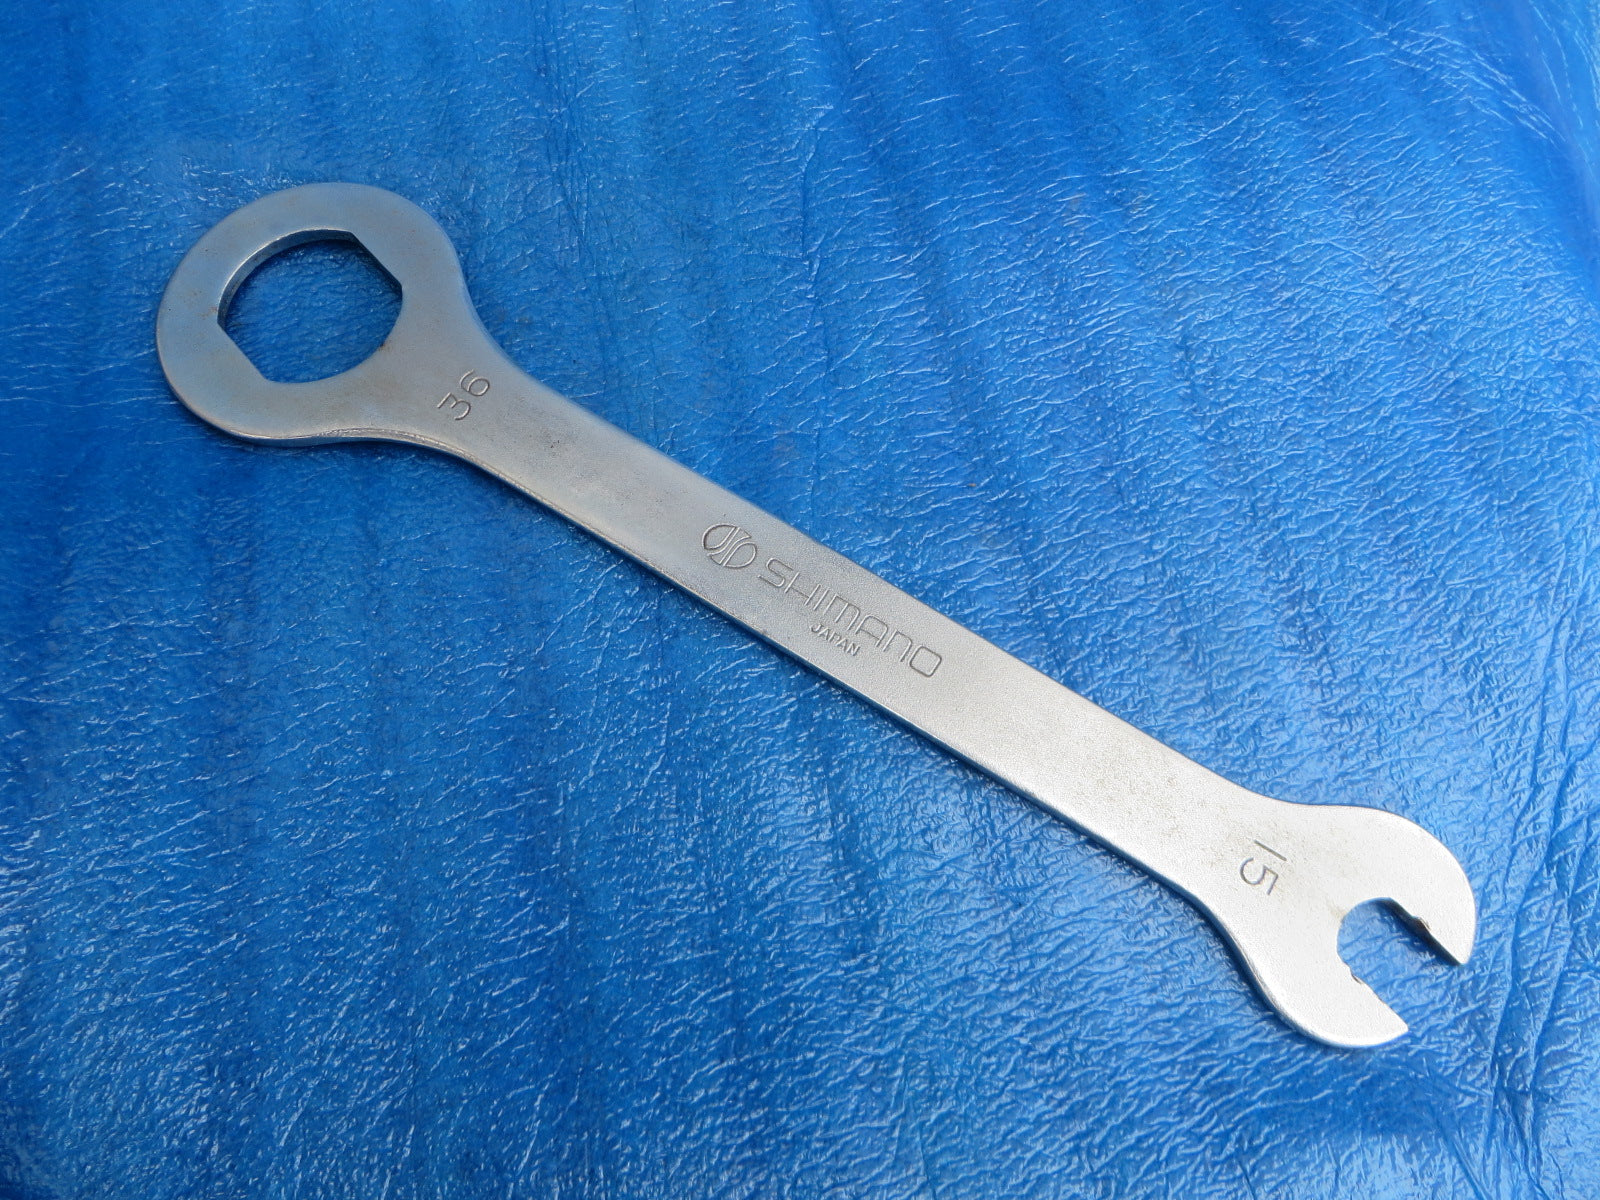 Vintage Shimano Pedal Wrench 15mm Bottom Bracket Spanner 36mm  Wrench Tool (22011021)